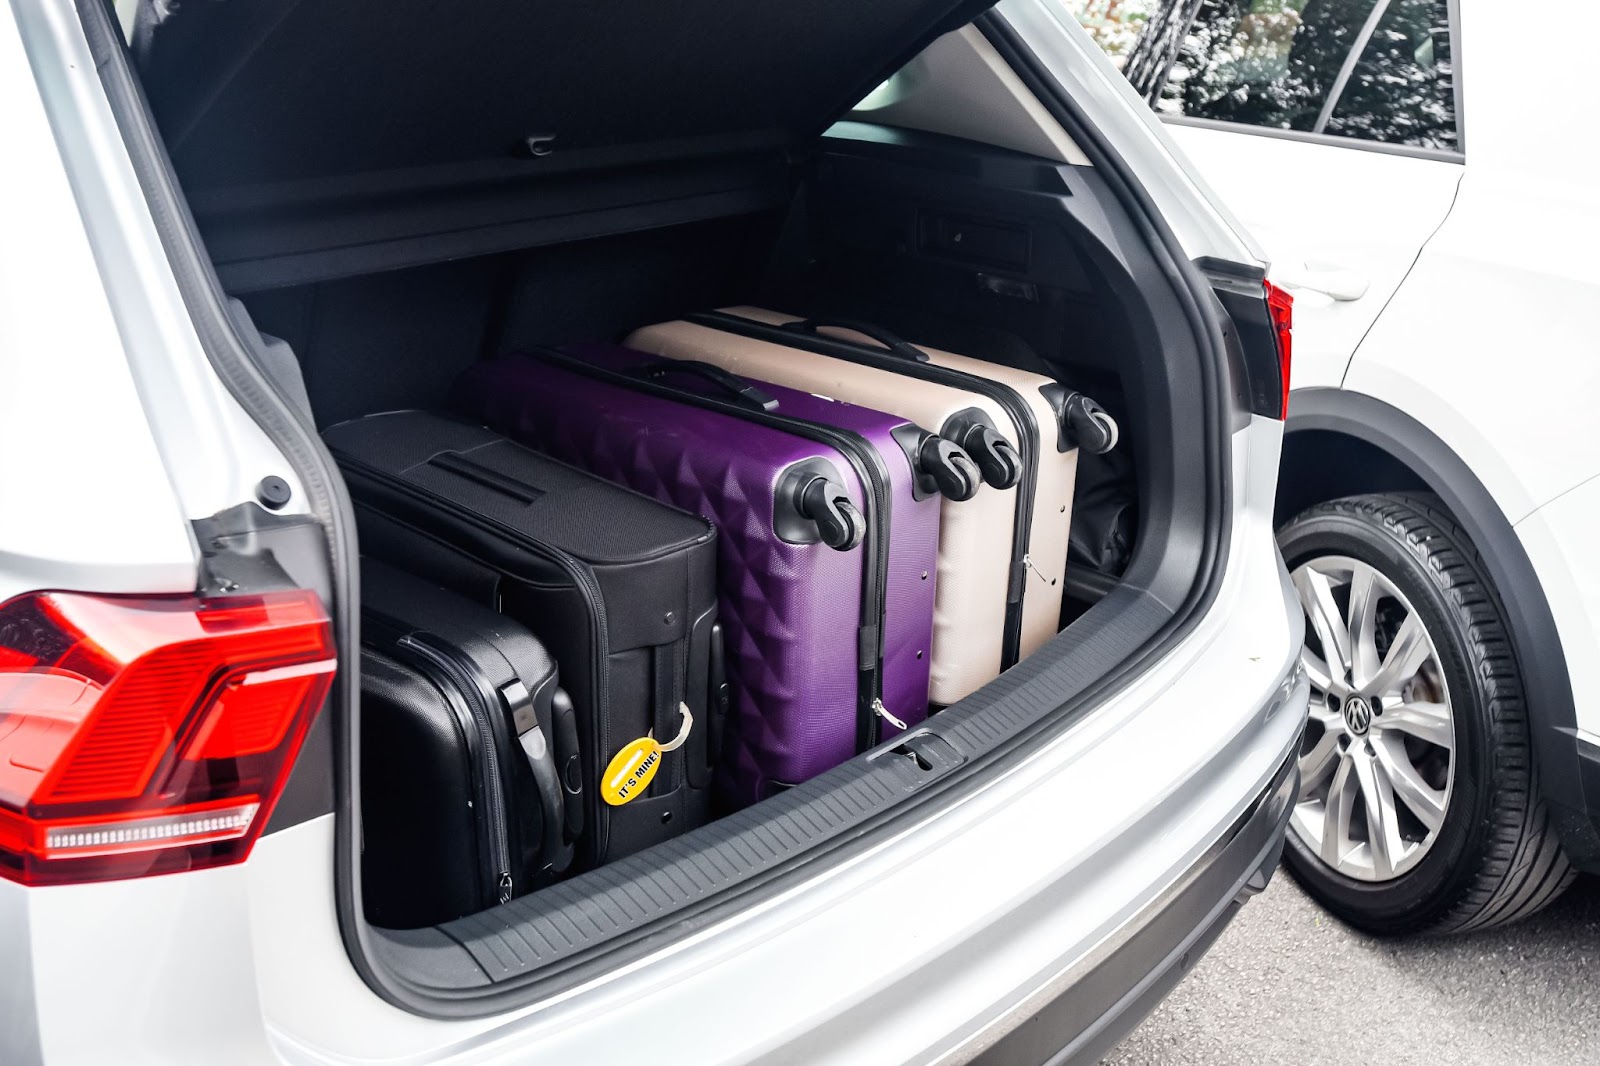 Car packed with luggage, road trip, travel, vacation, maintenance